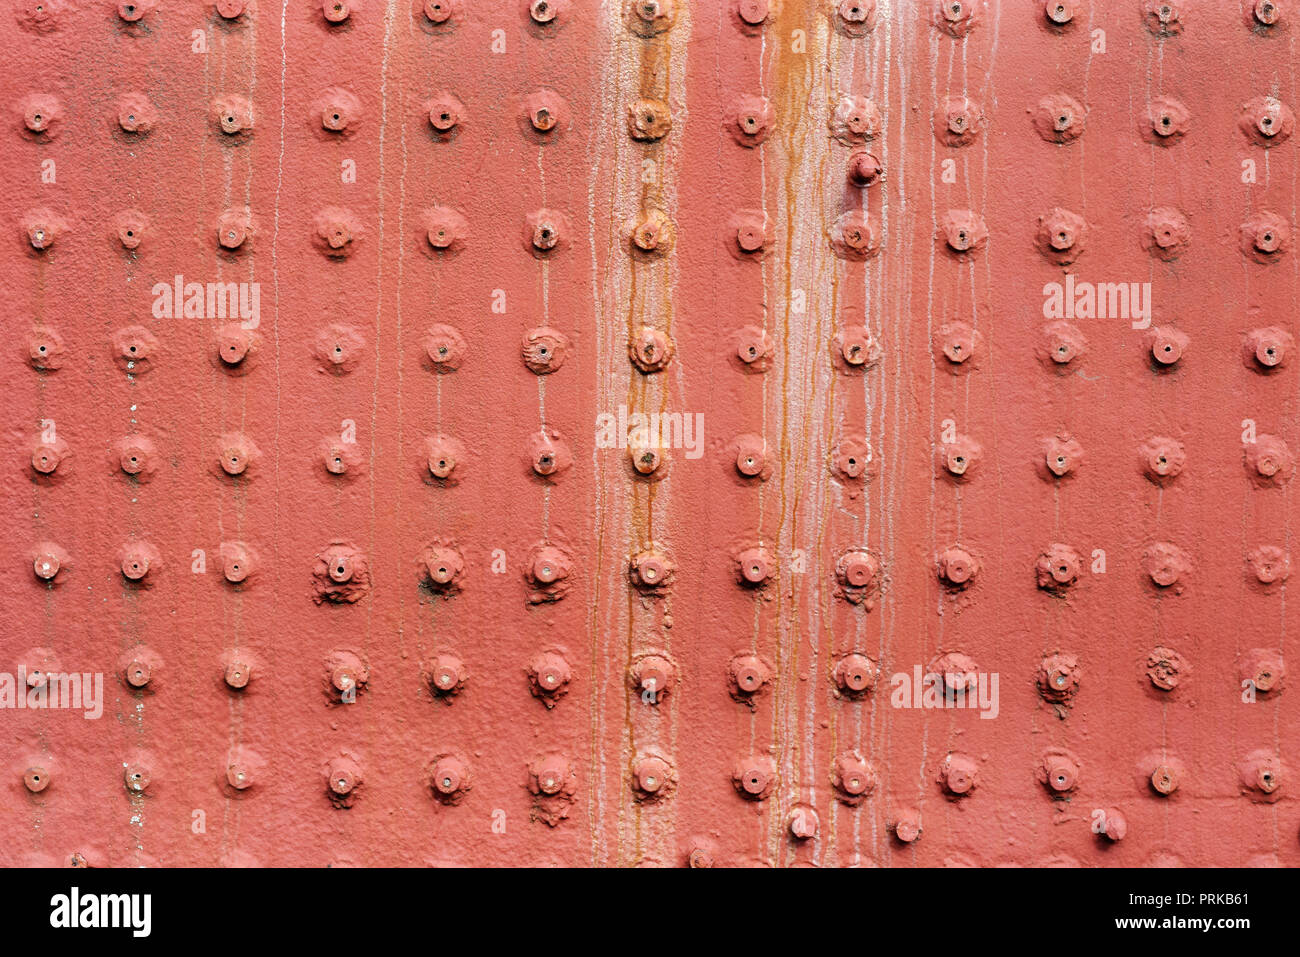 Backgrounds and textures: old painted metal wall surface with riveted joints, industrial abstract Stock Photo